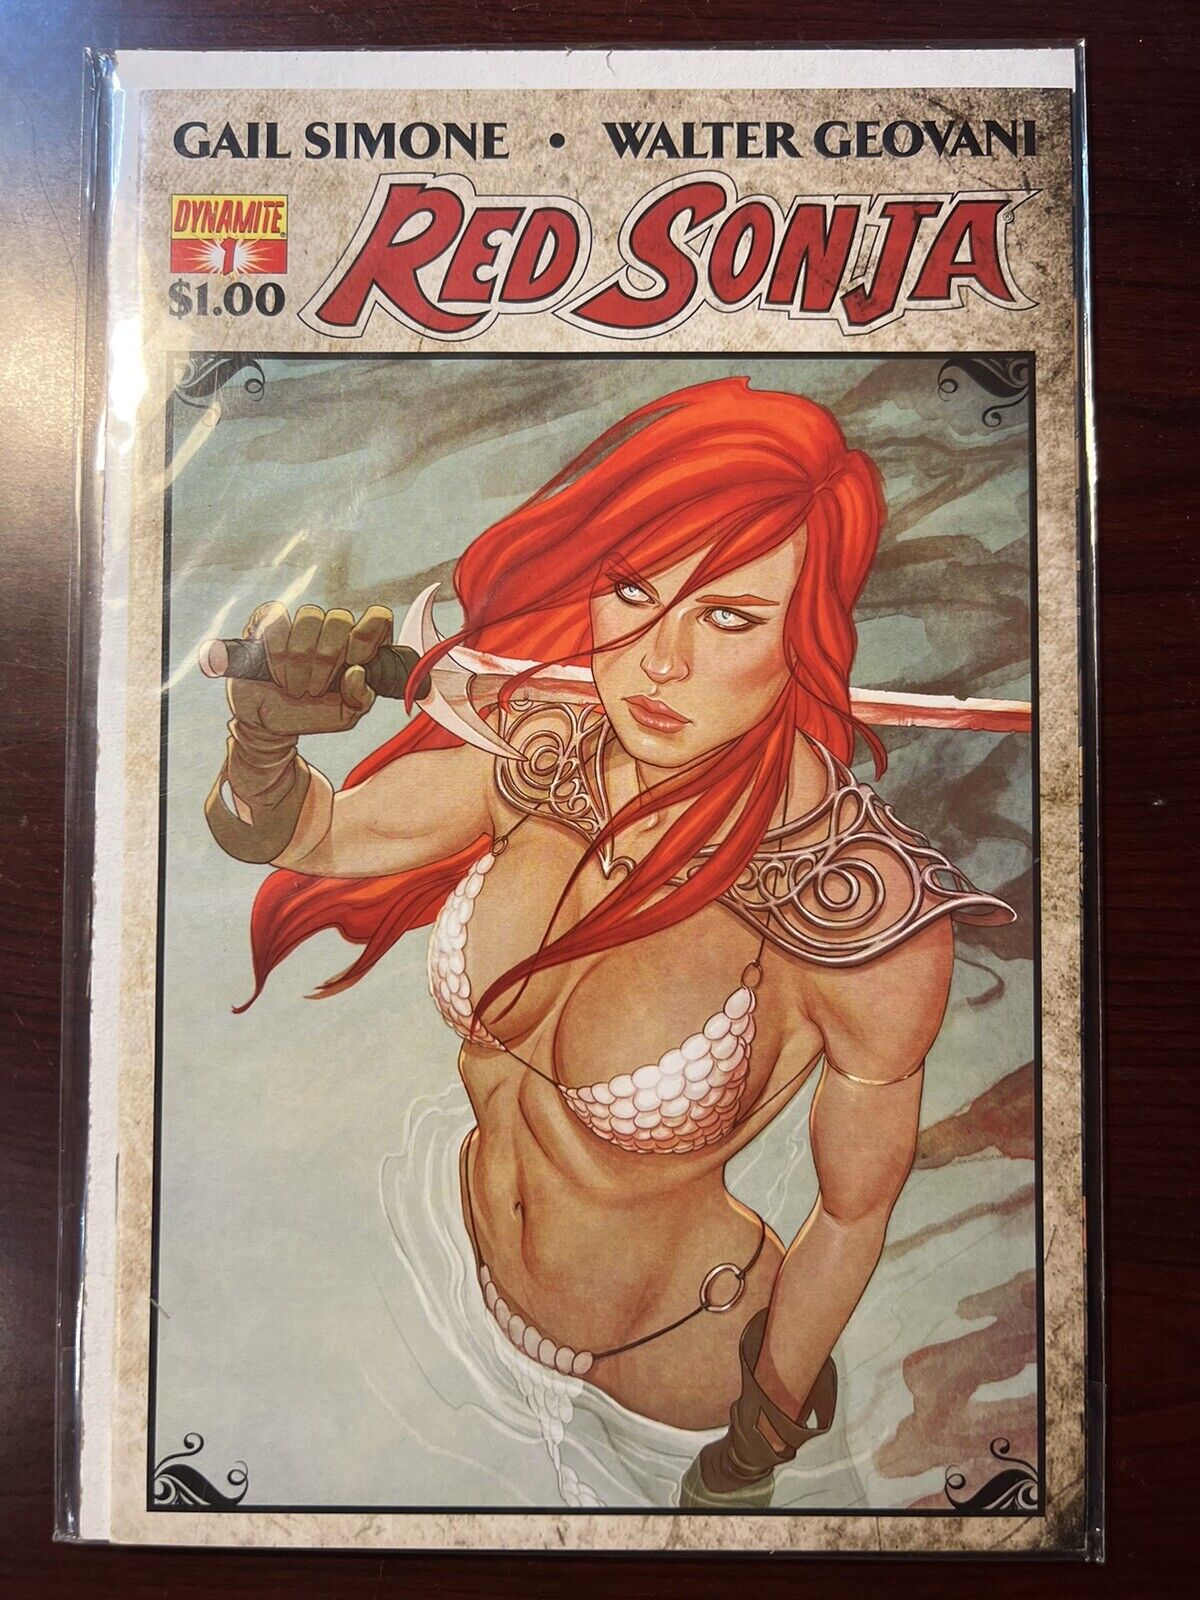 Red Sonja #1 Dollar Variant 2013 Dynamite Comics 🔥COMBINED SHIPPING